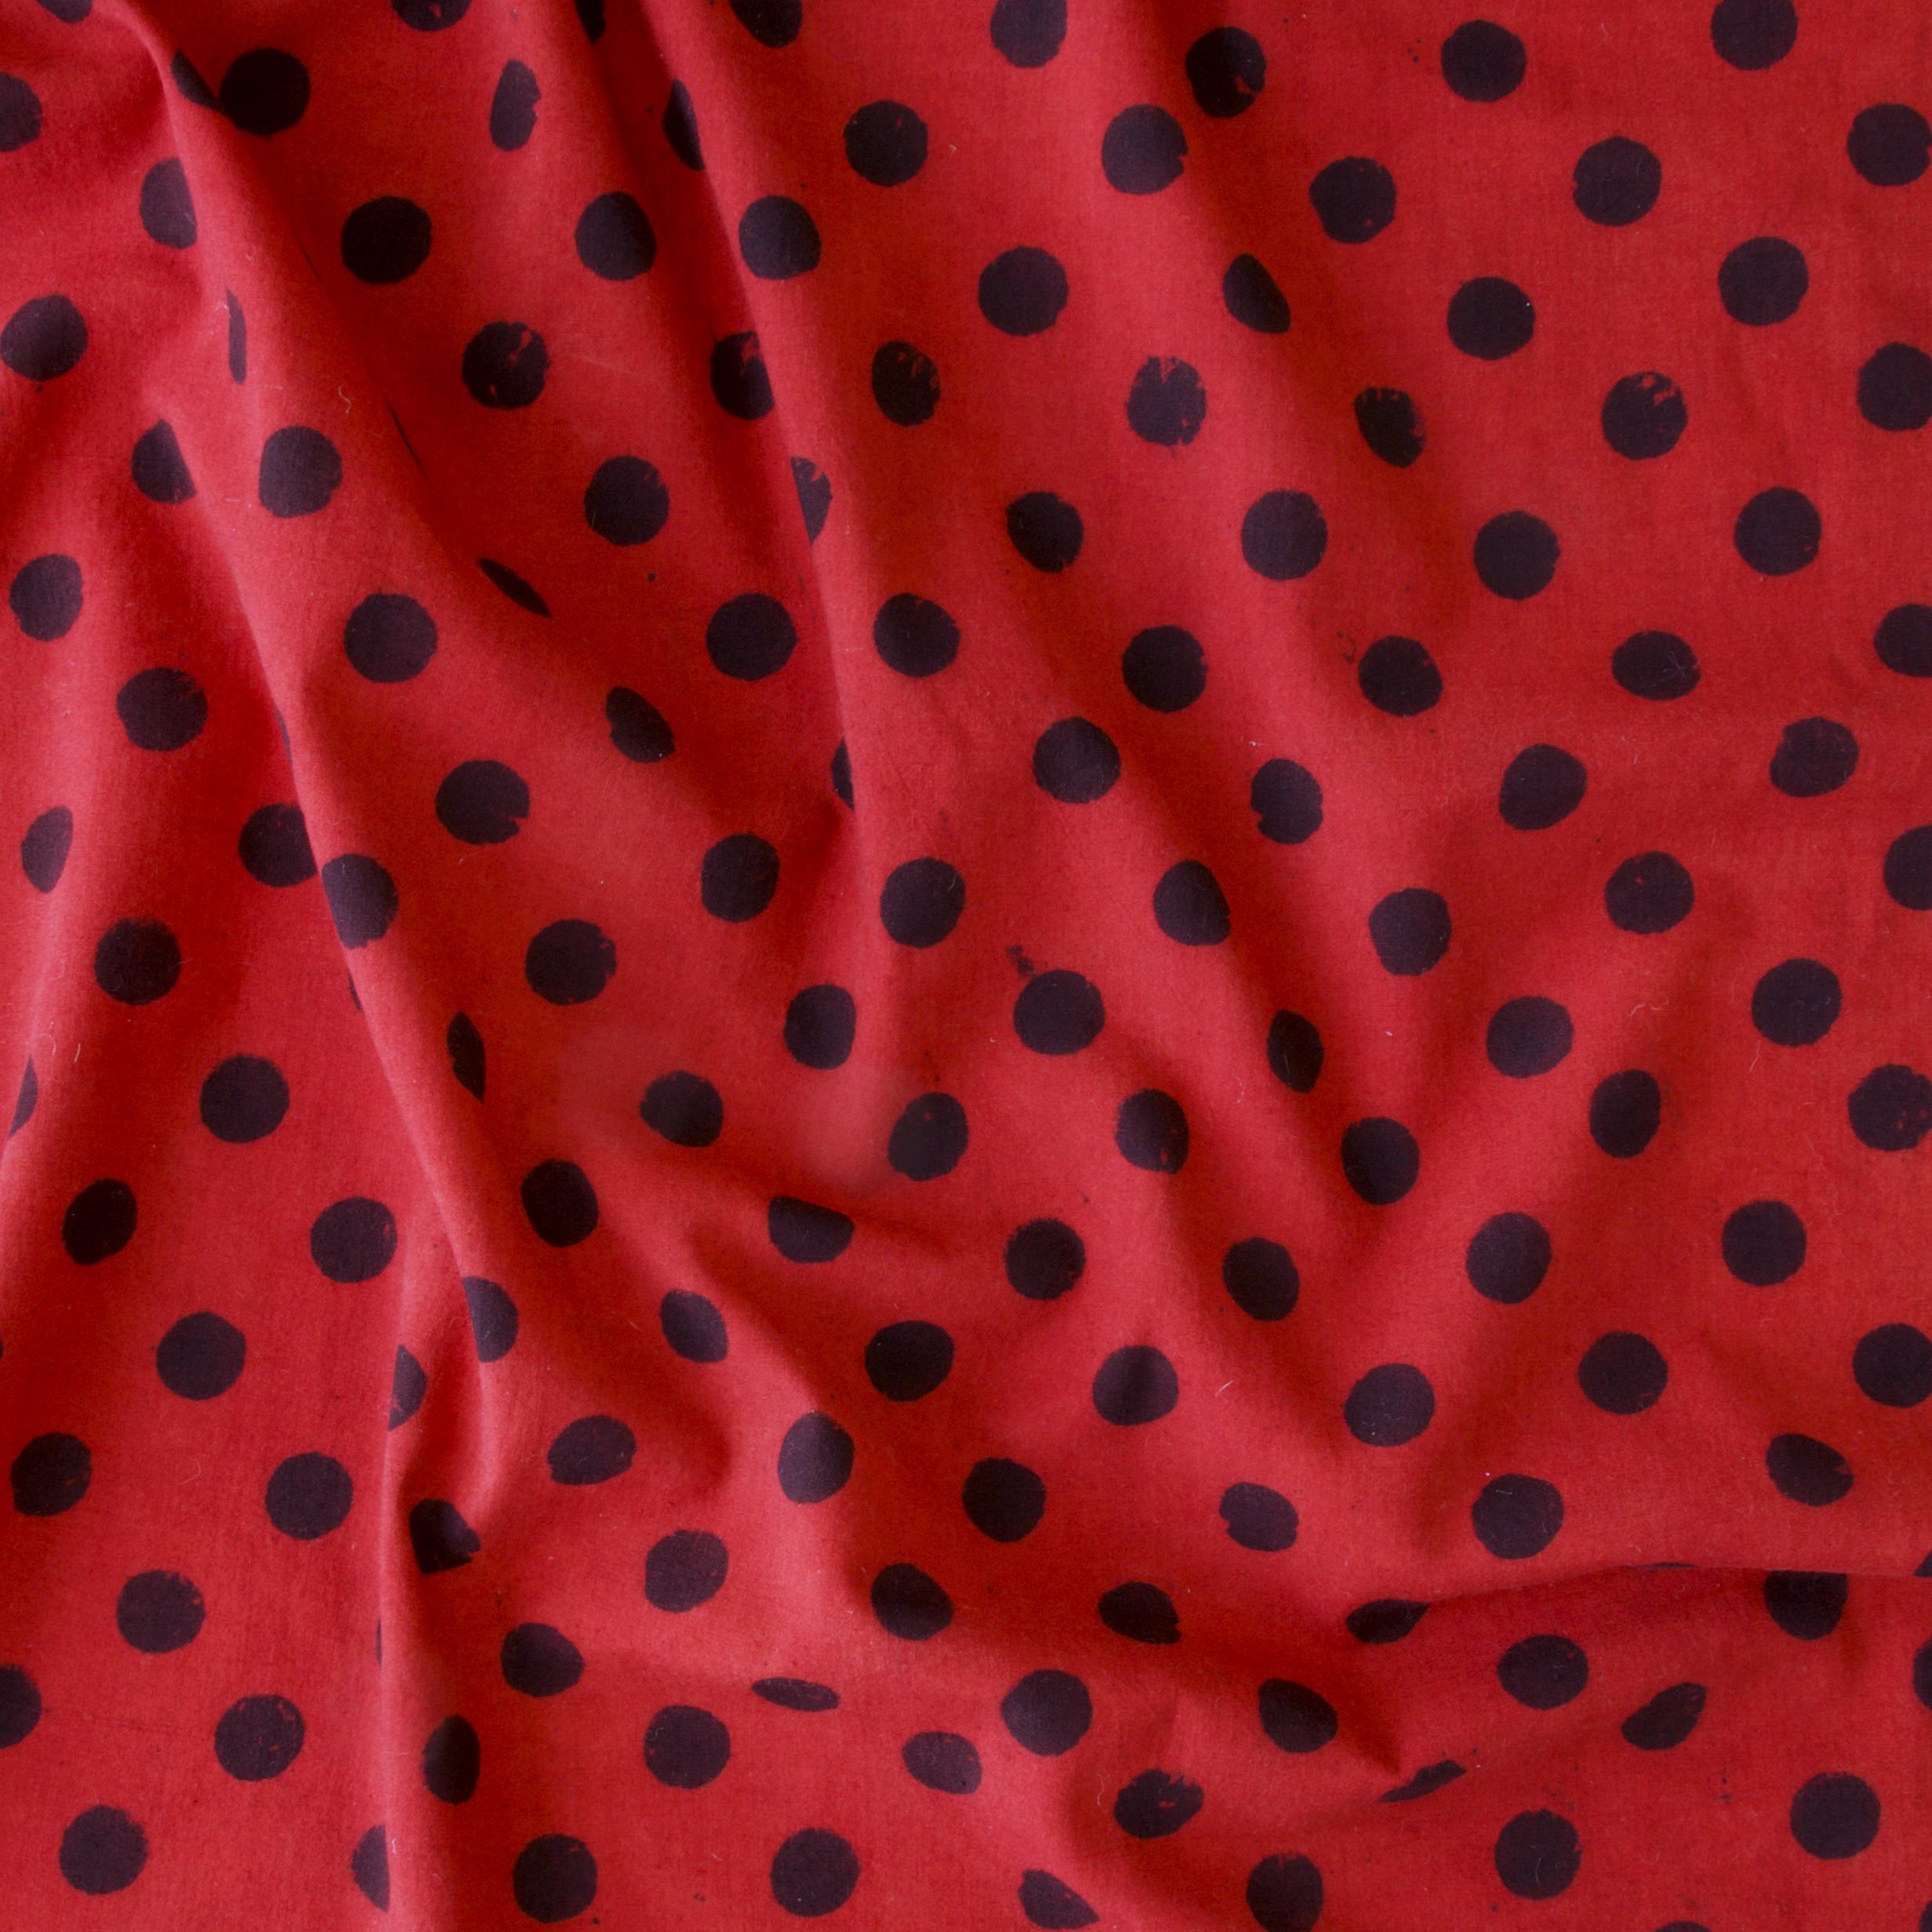 AHM16 - Block-Printed Cotton Fabric From India - Dots Motif - Black Iron and Red Alizarin Dye - Contrast - Live